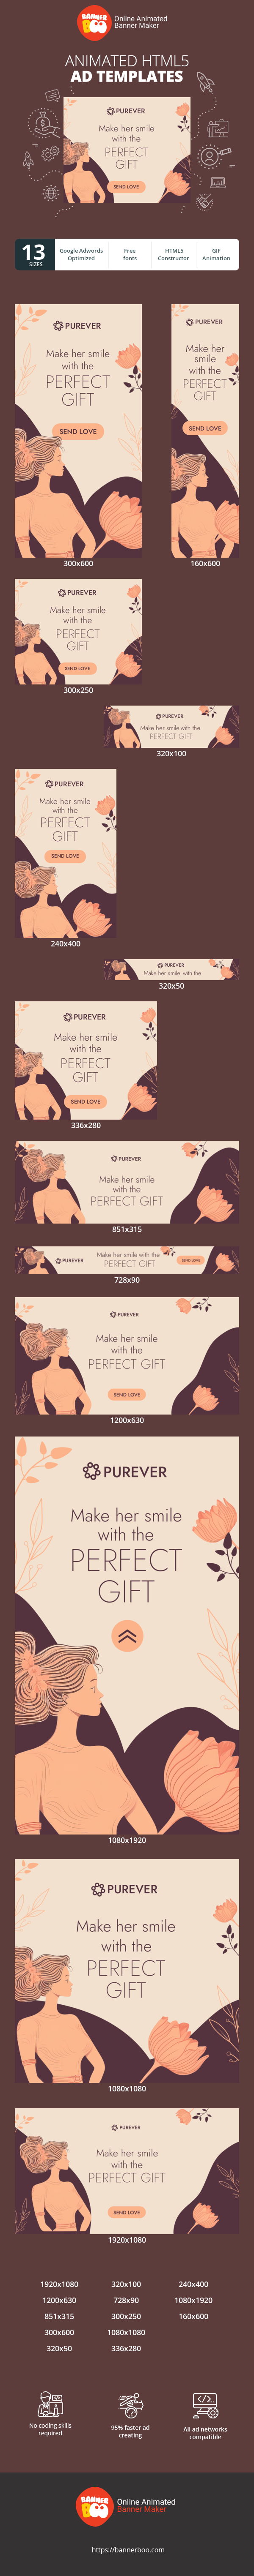 Banner ad template — Make Her Smile With The Perfect Gift — Women's Day